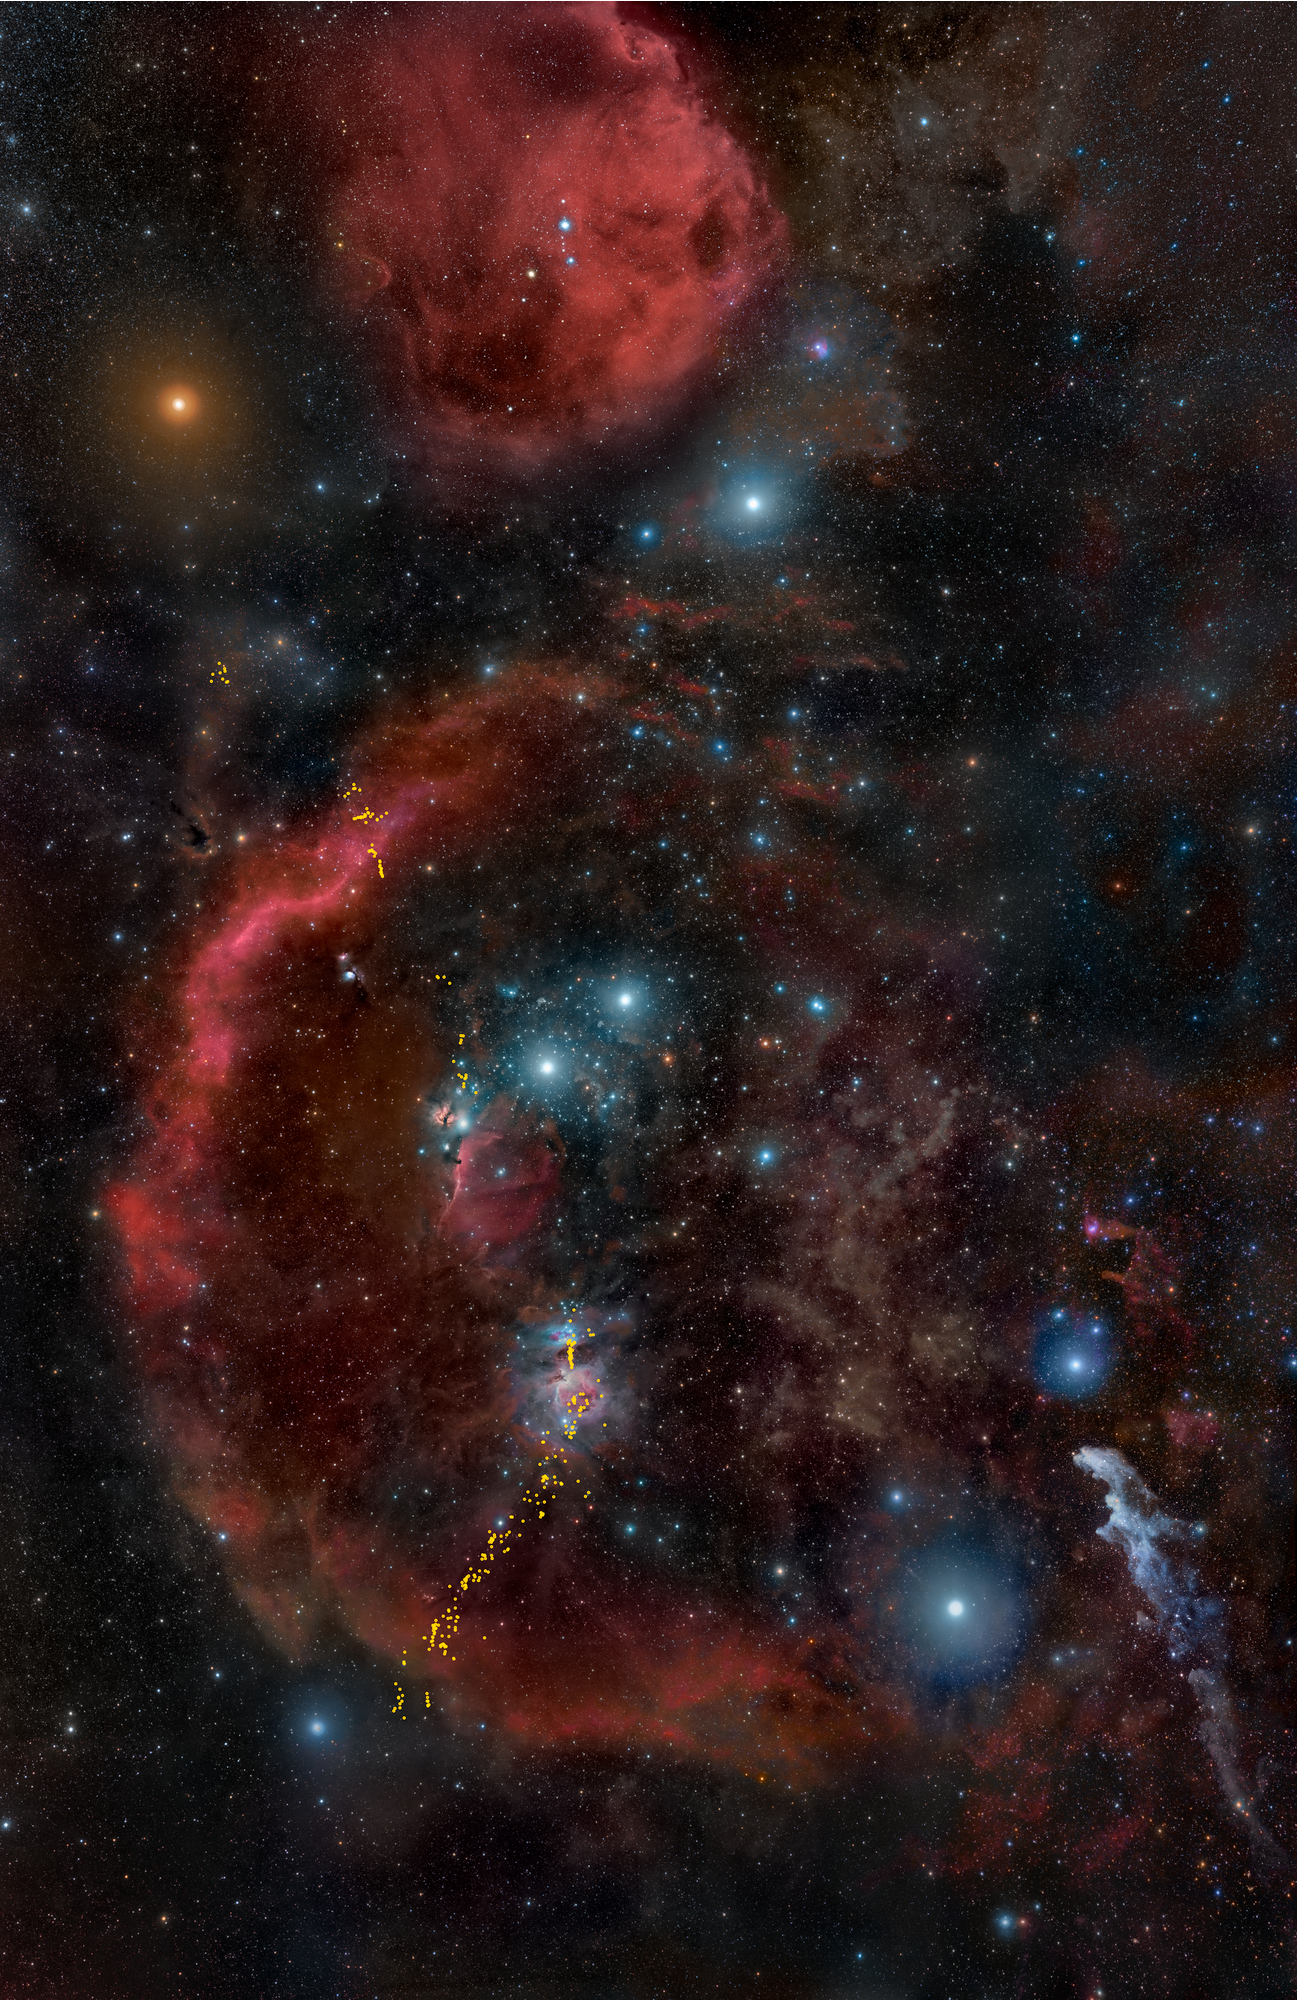 This ground-based image offers a wide view of the entire Orion cloud complex, the closest major star-forming region to Earth.